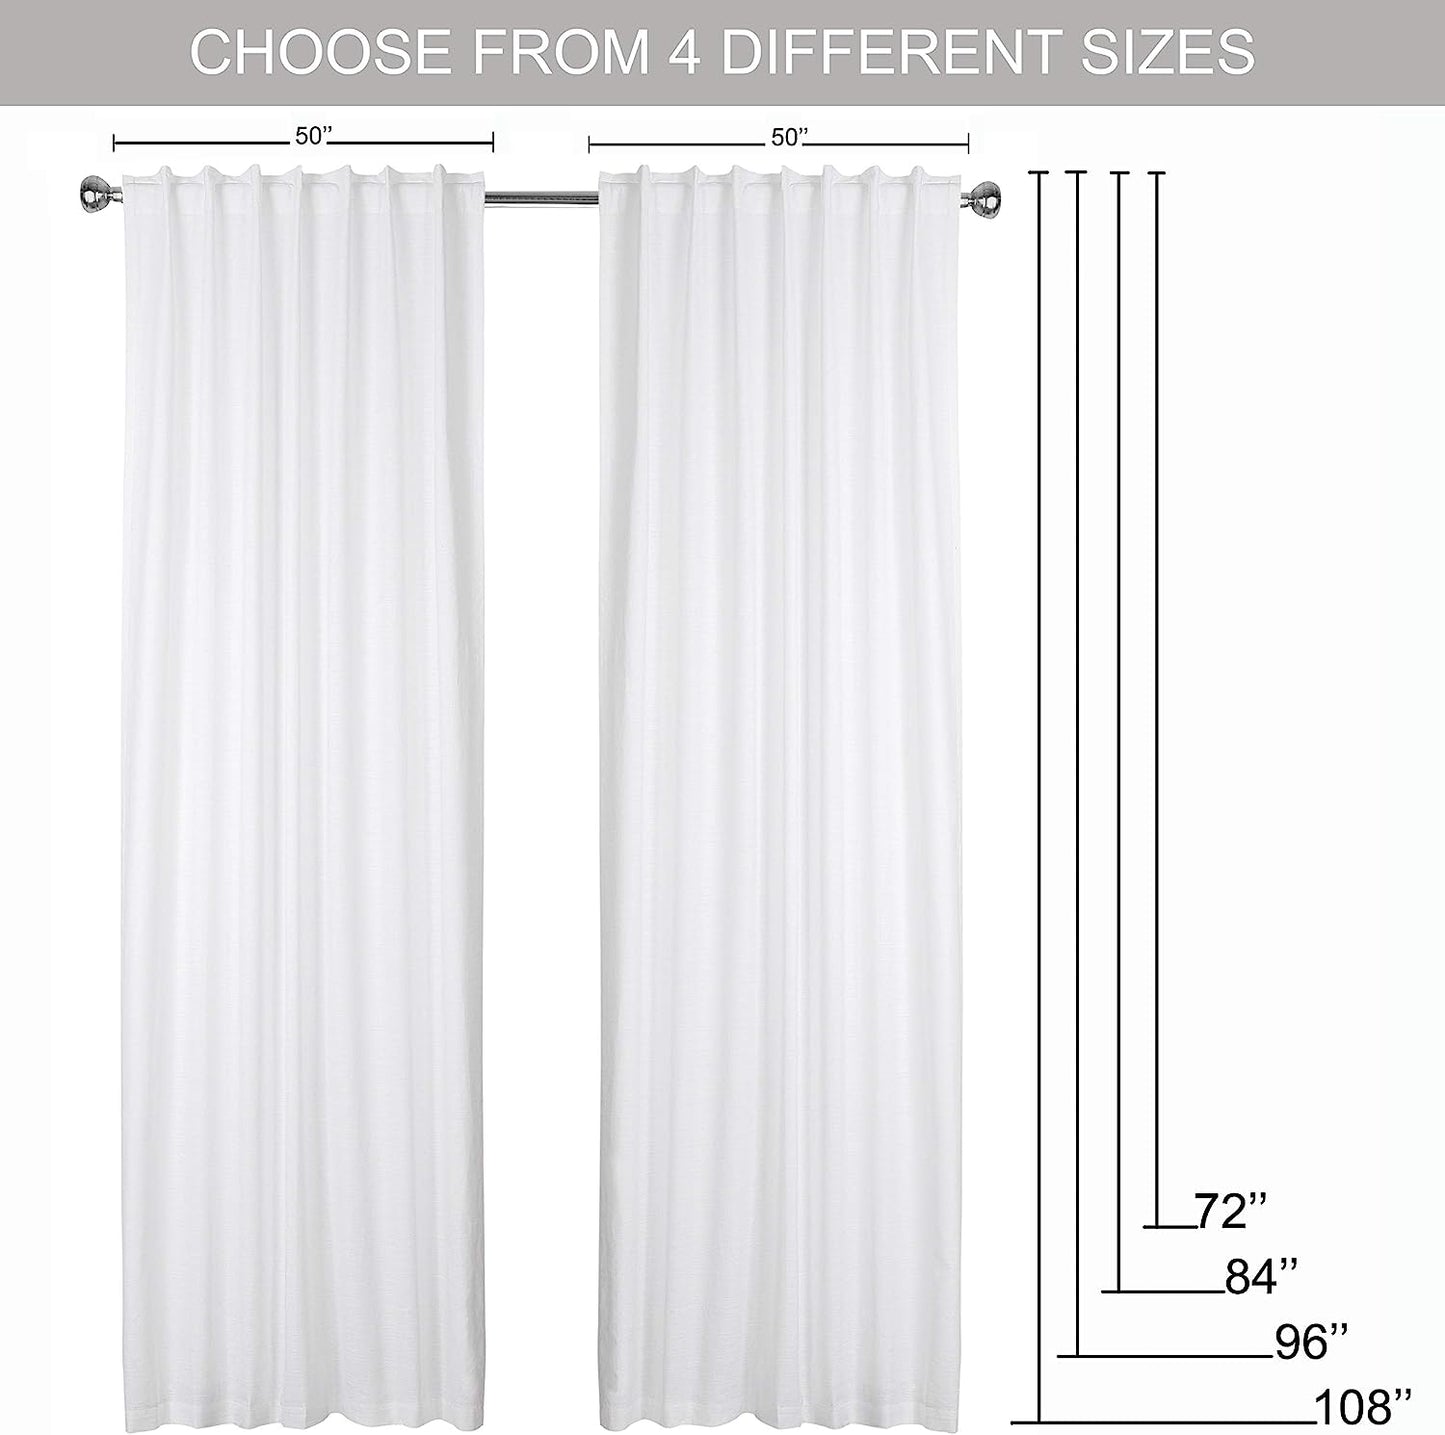 White Cotton Curtains 96 Inches Long for Living Room - Textured Semi Sheer Light Filtering Window Curtain for Boho Décor - Farmhouse Linen Back Tab Drapes for Bedroom Kitchen - 50X96 Inch, 2 Panels  The Beer Valley   